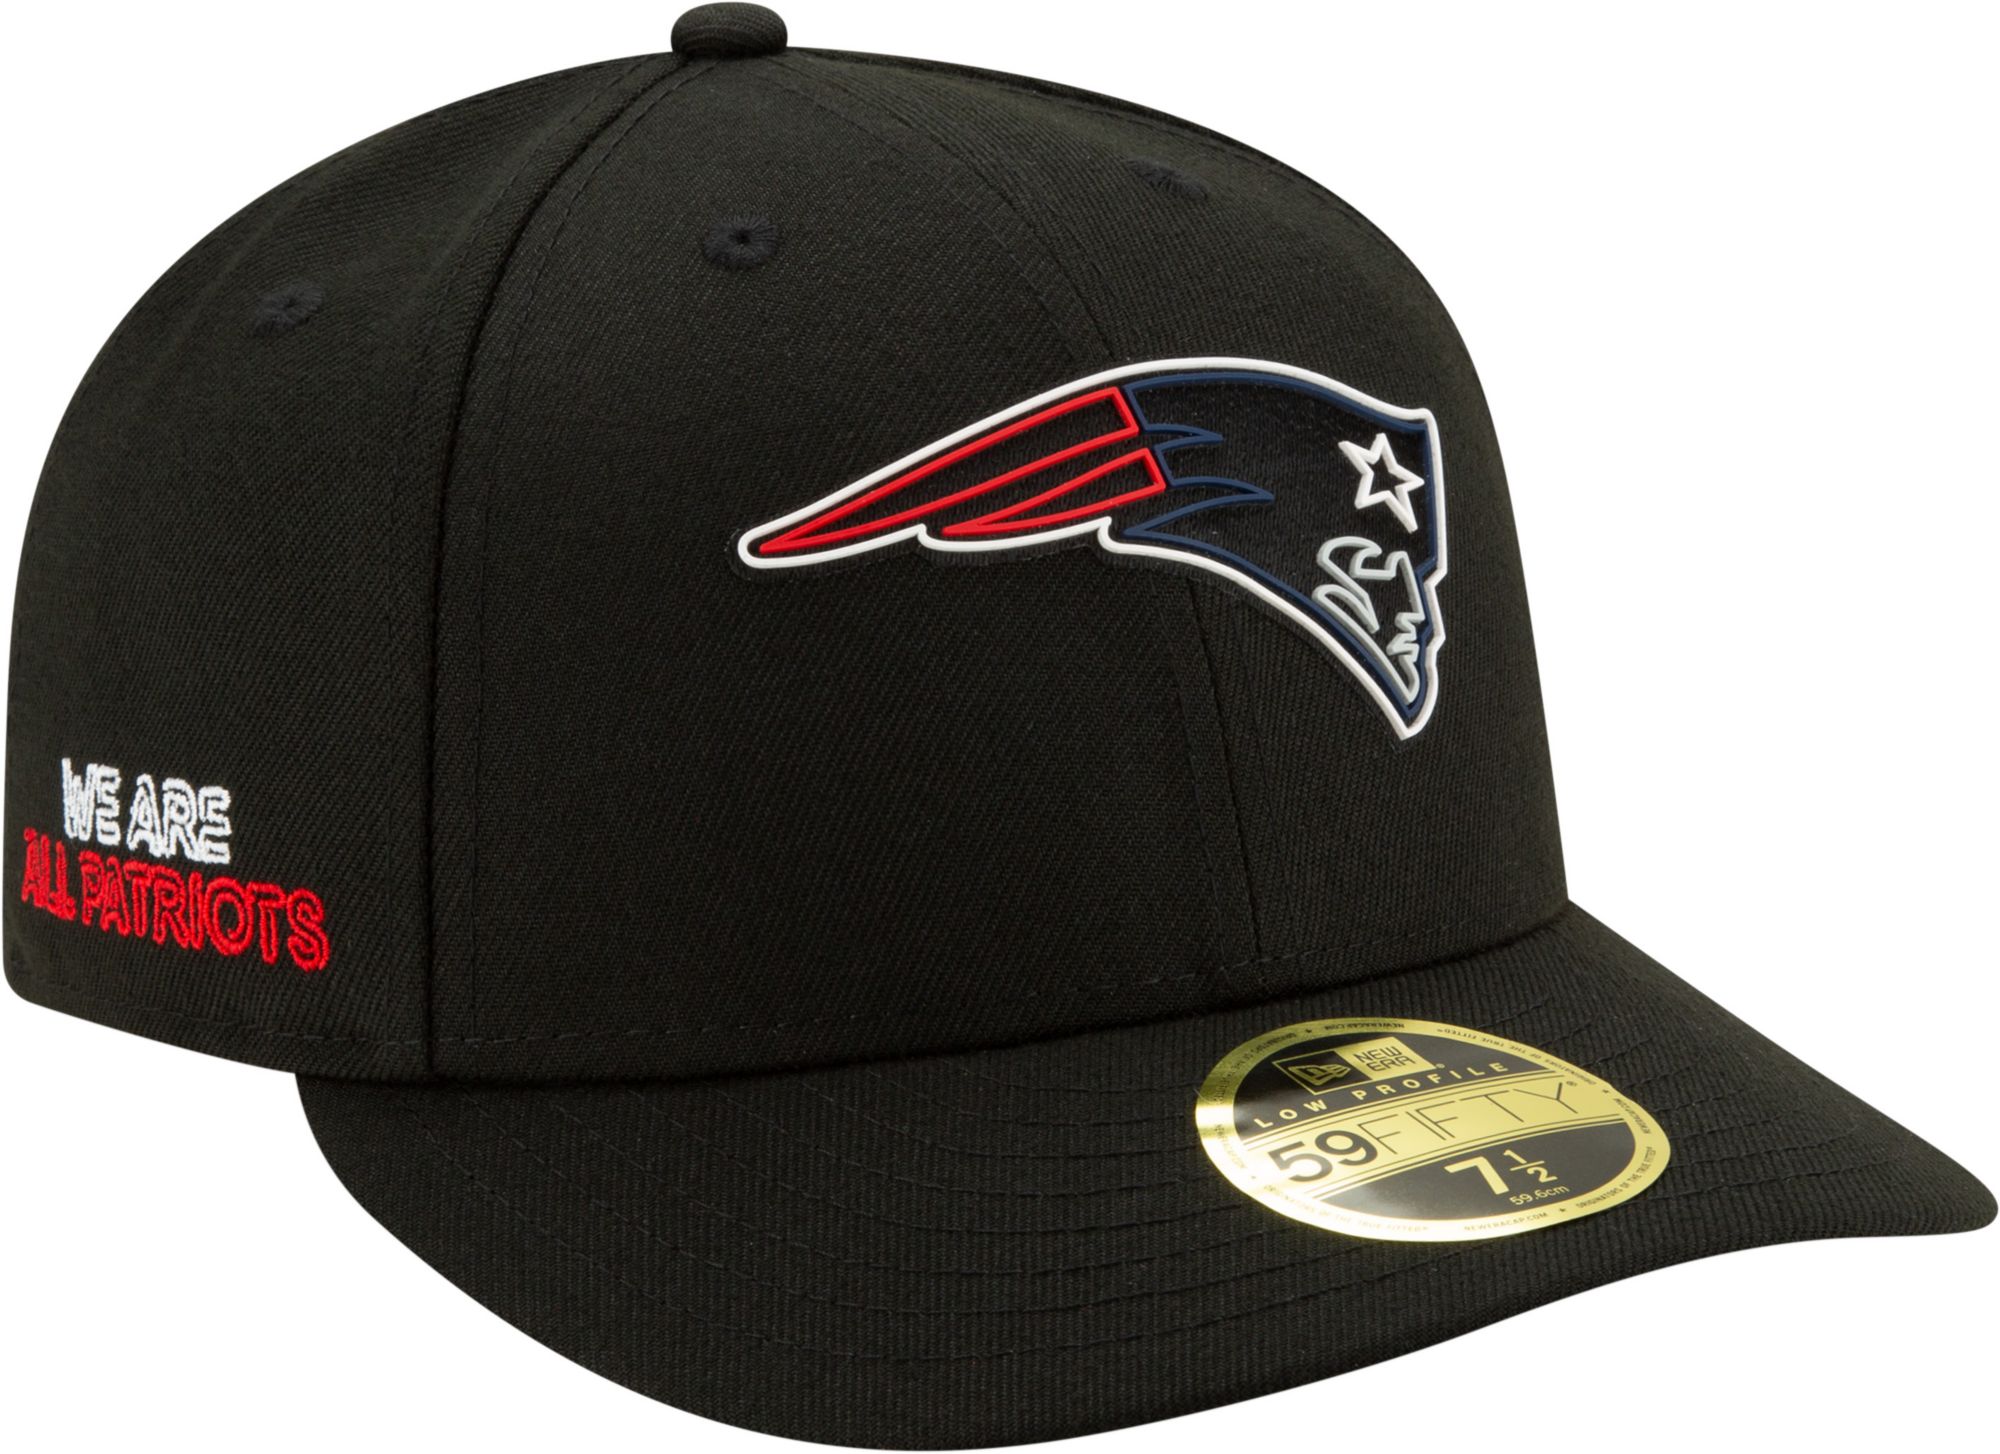 2020 NFL Draft 59Fifty Fitted Black Hat 